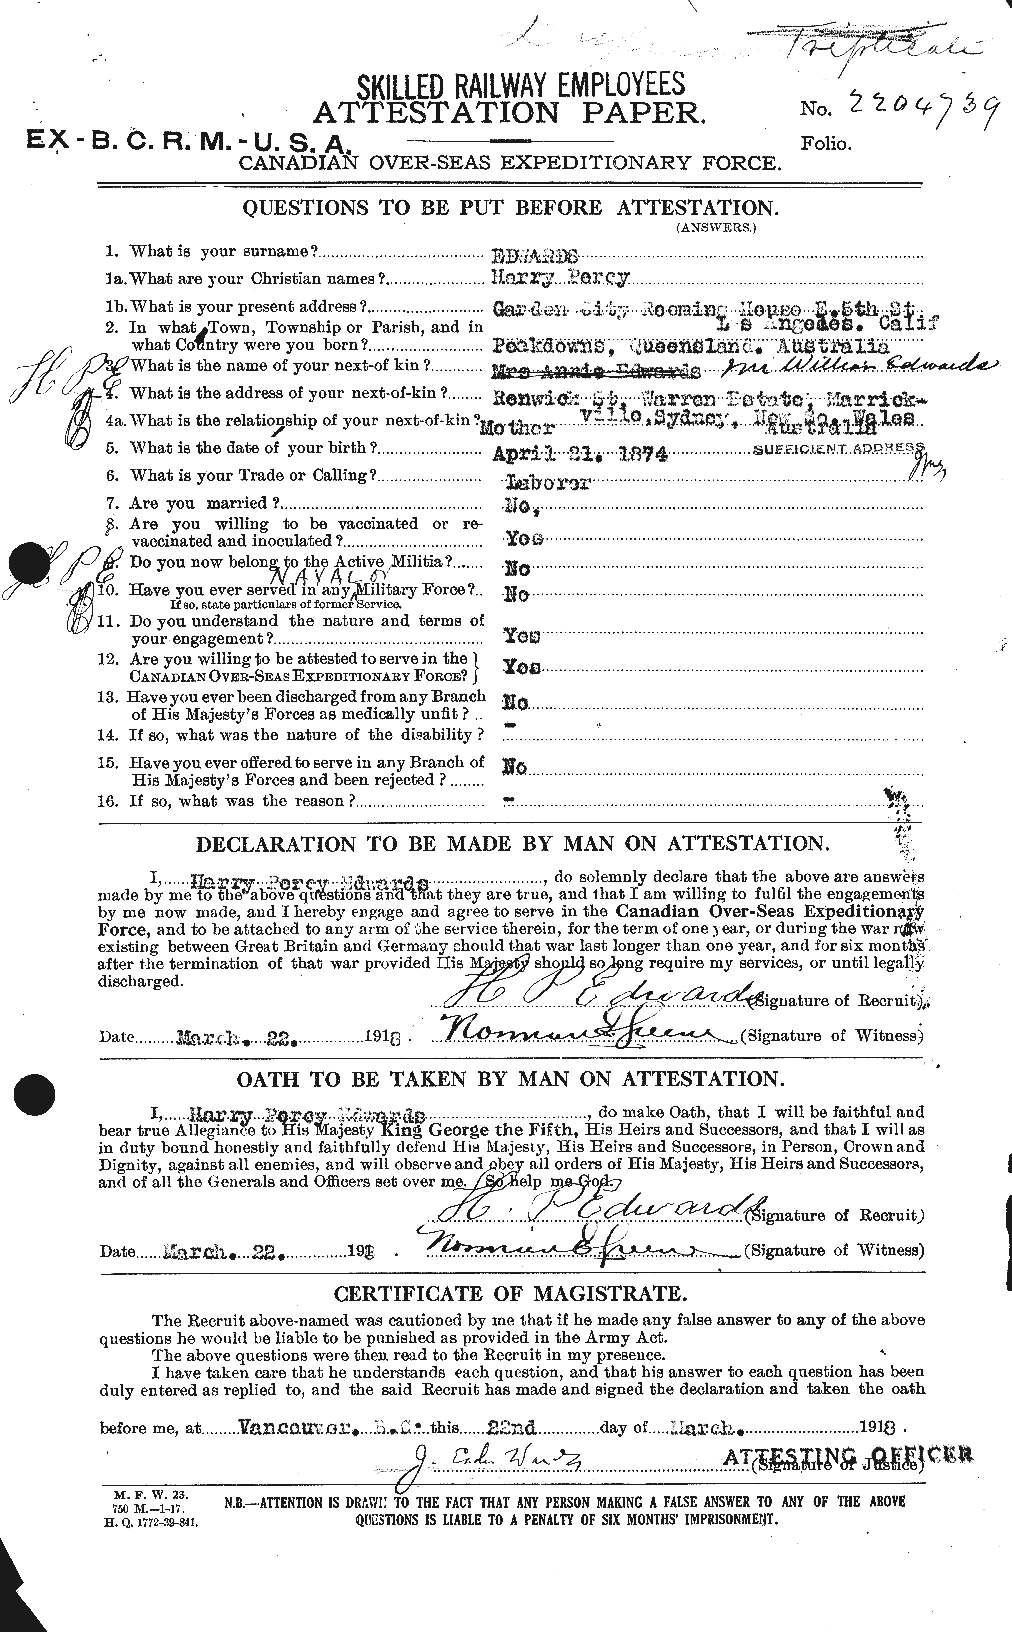 Personnel Records of the First World War - CEF 309745a